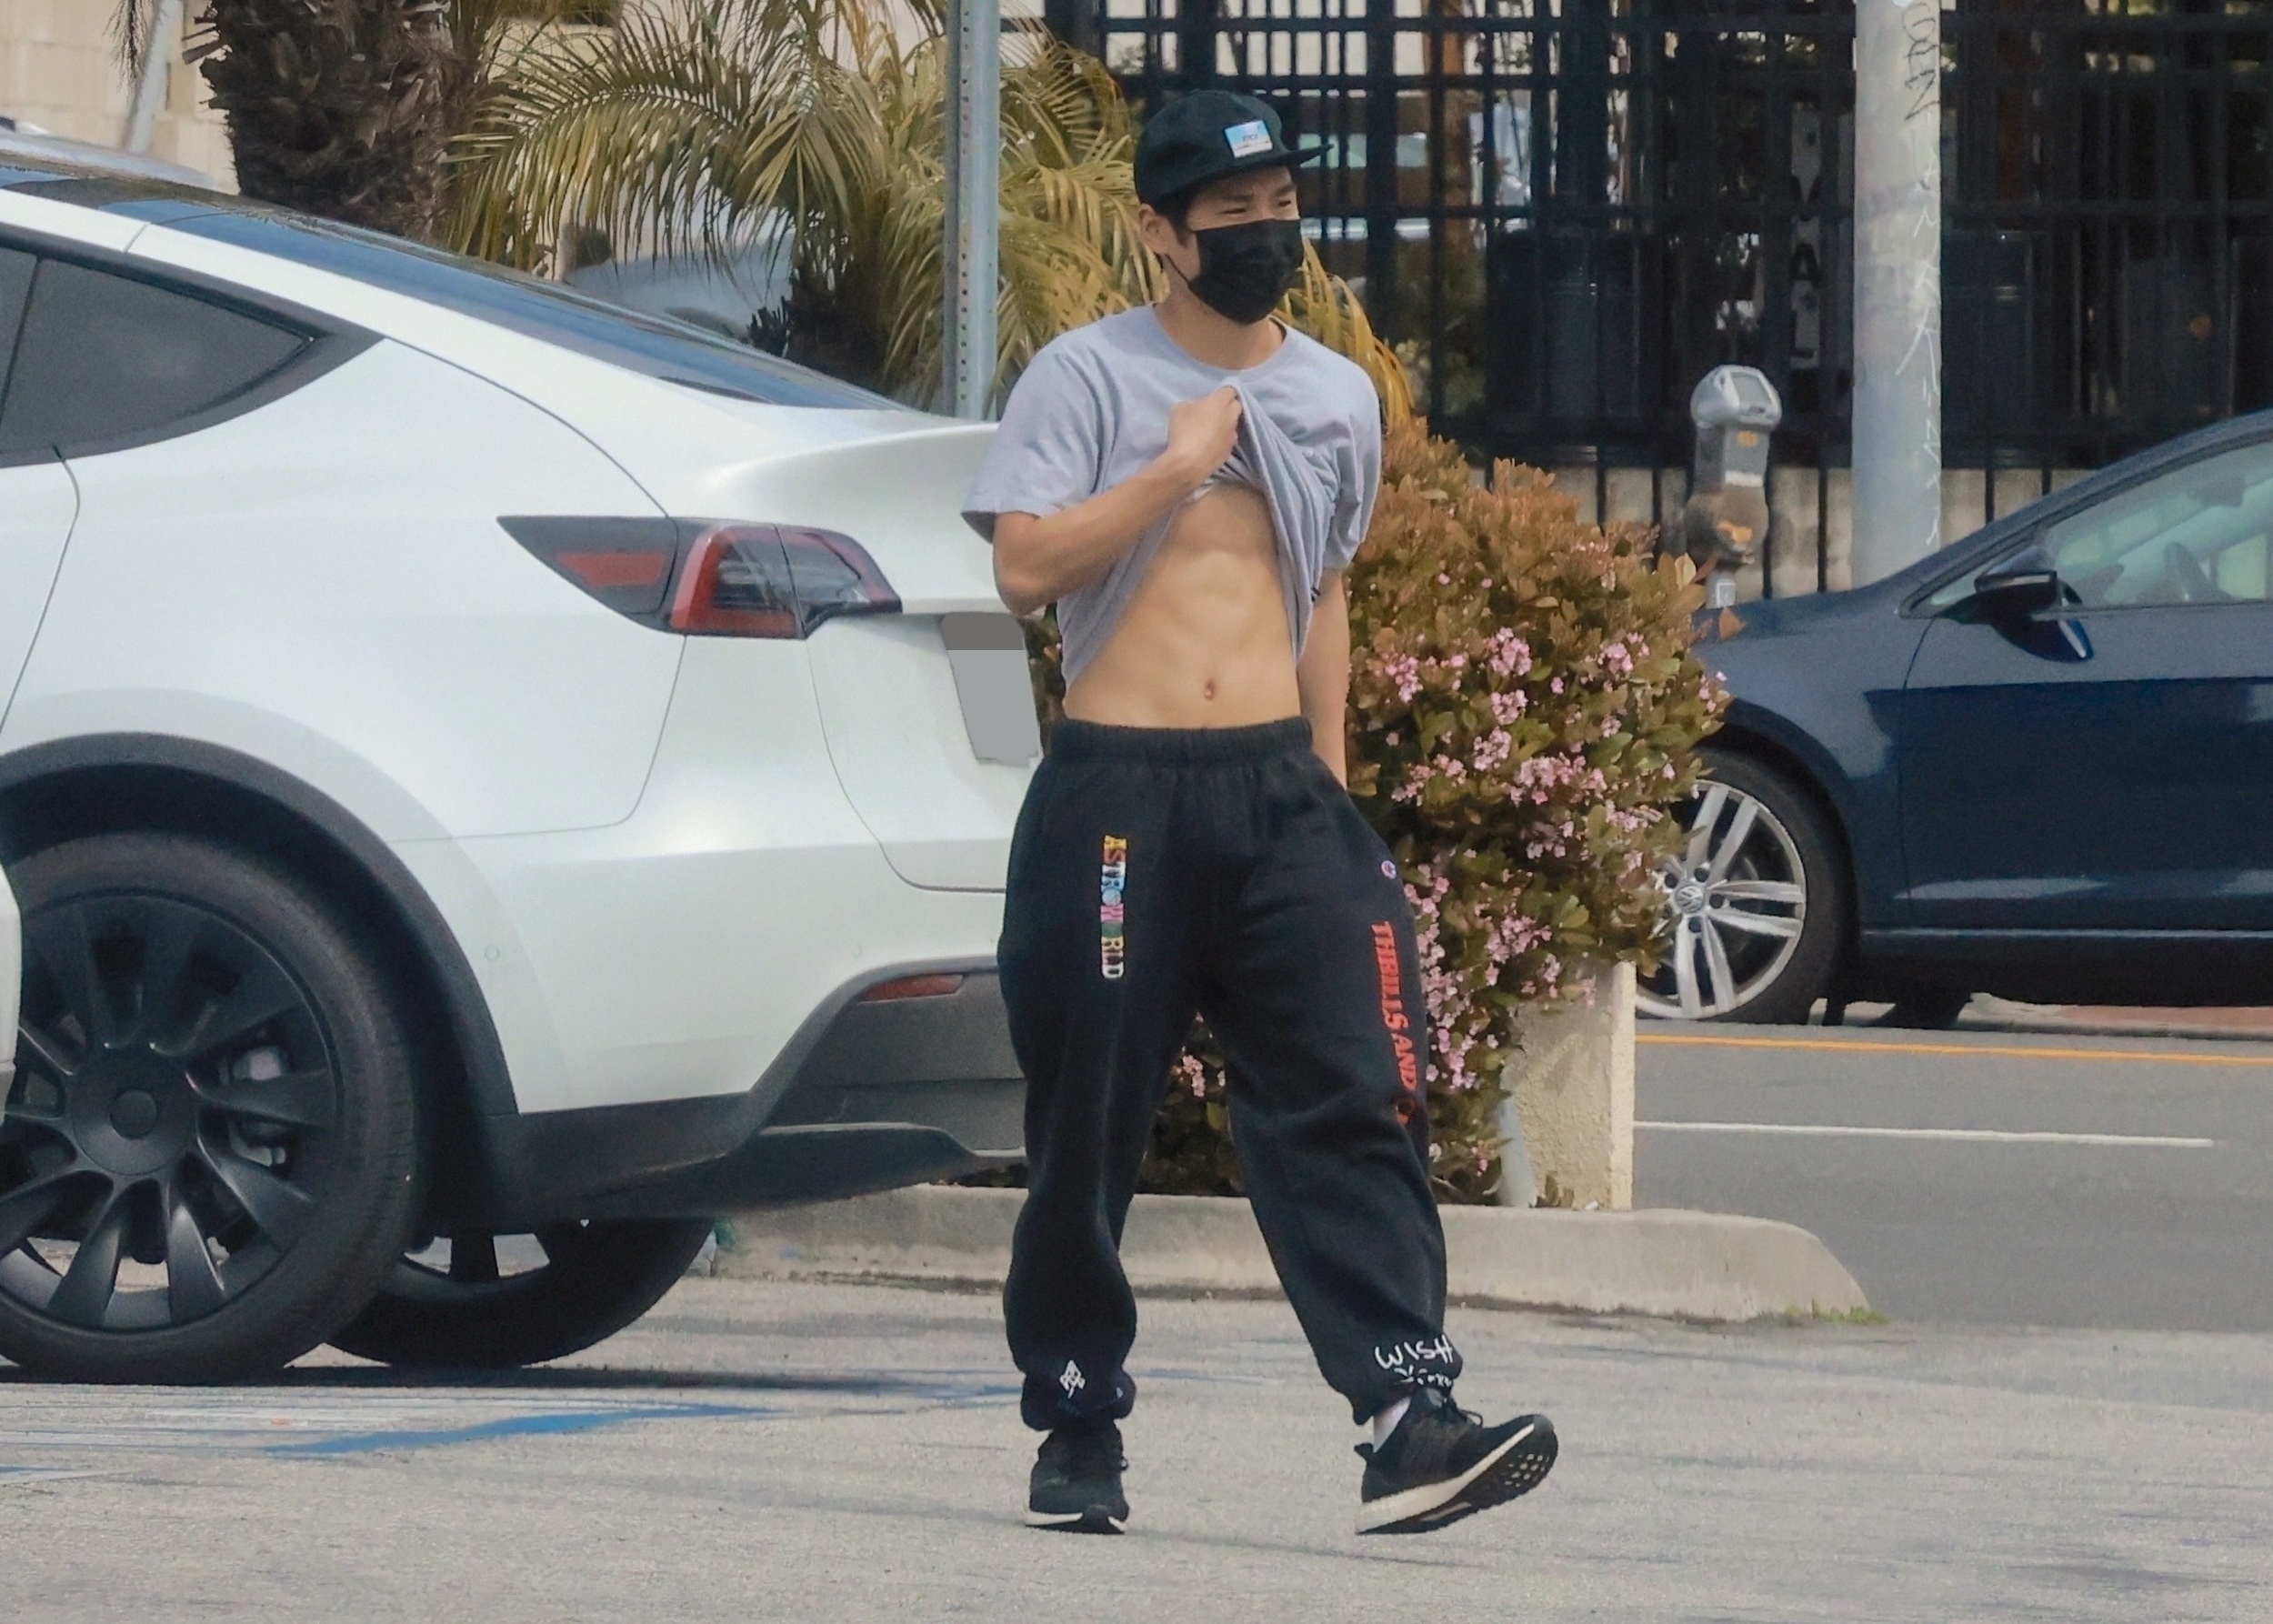 The 19-year-old was proud of his abs and defiantly showed them off in a parking lot